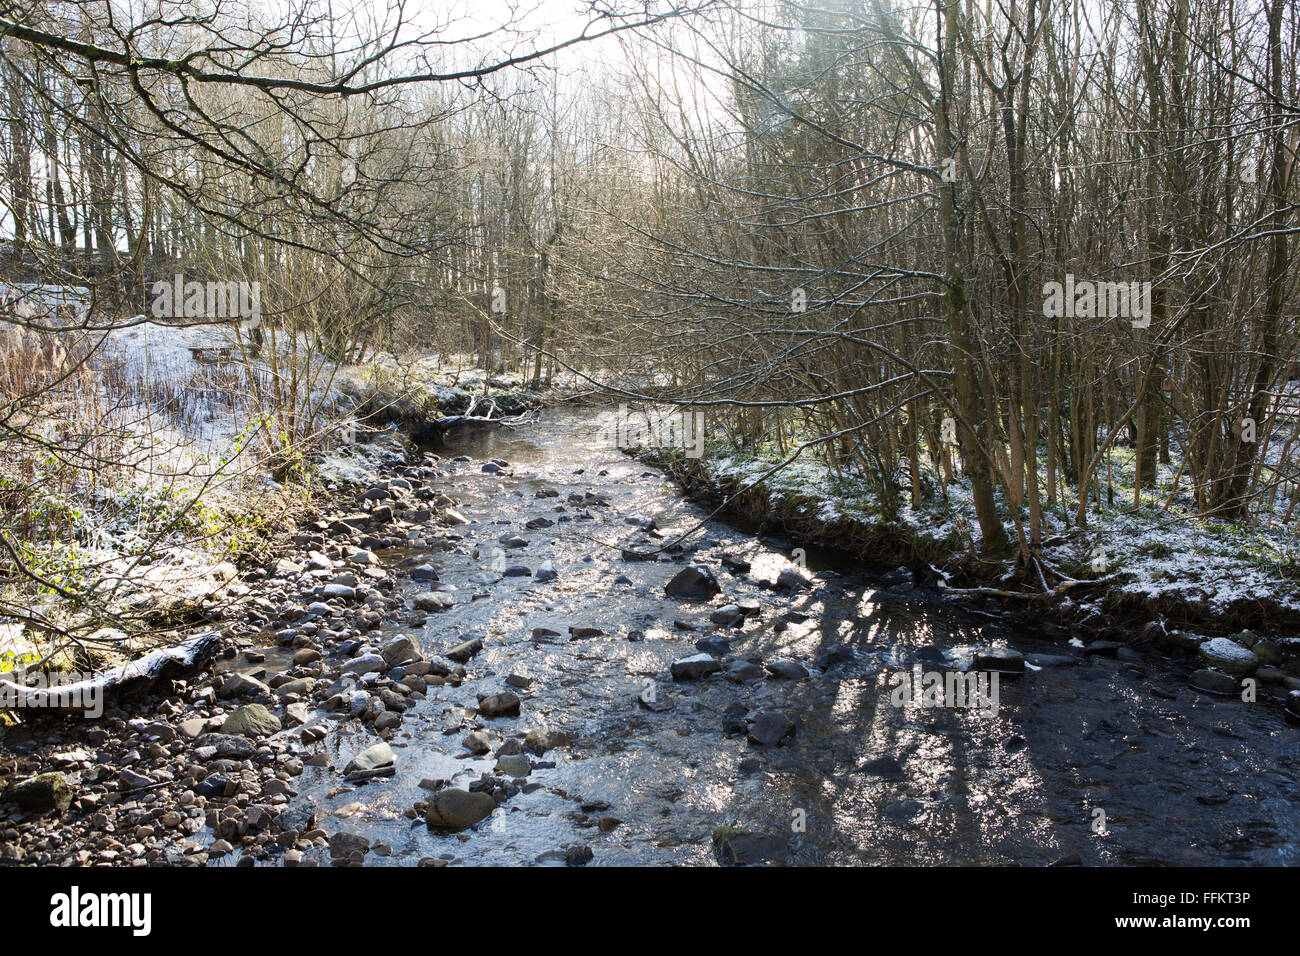 Bow Lee Beck in Upper Teesdale in County Durham, England. Snow dusts the ground by the waterway. Stock Photo